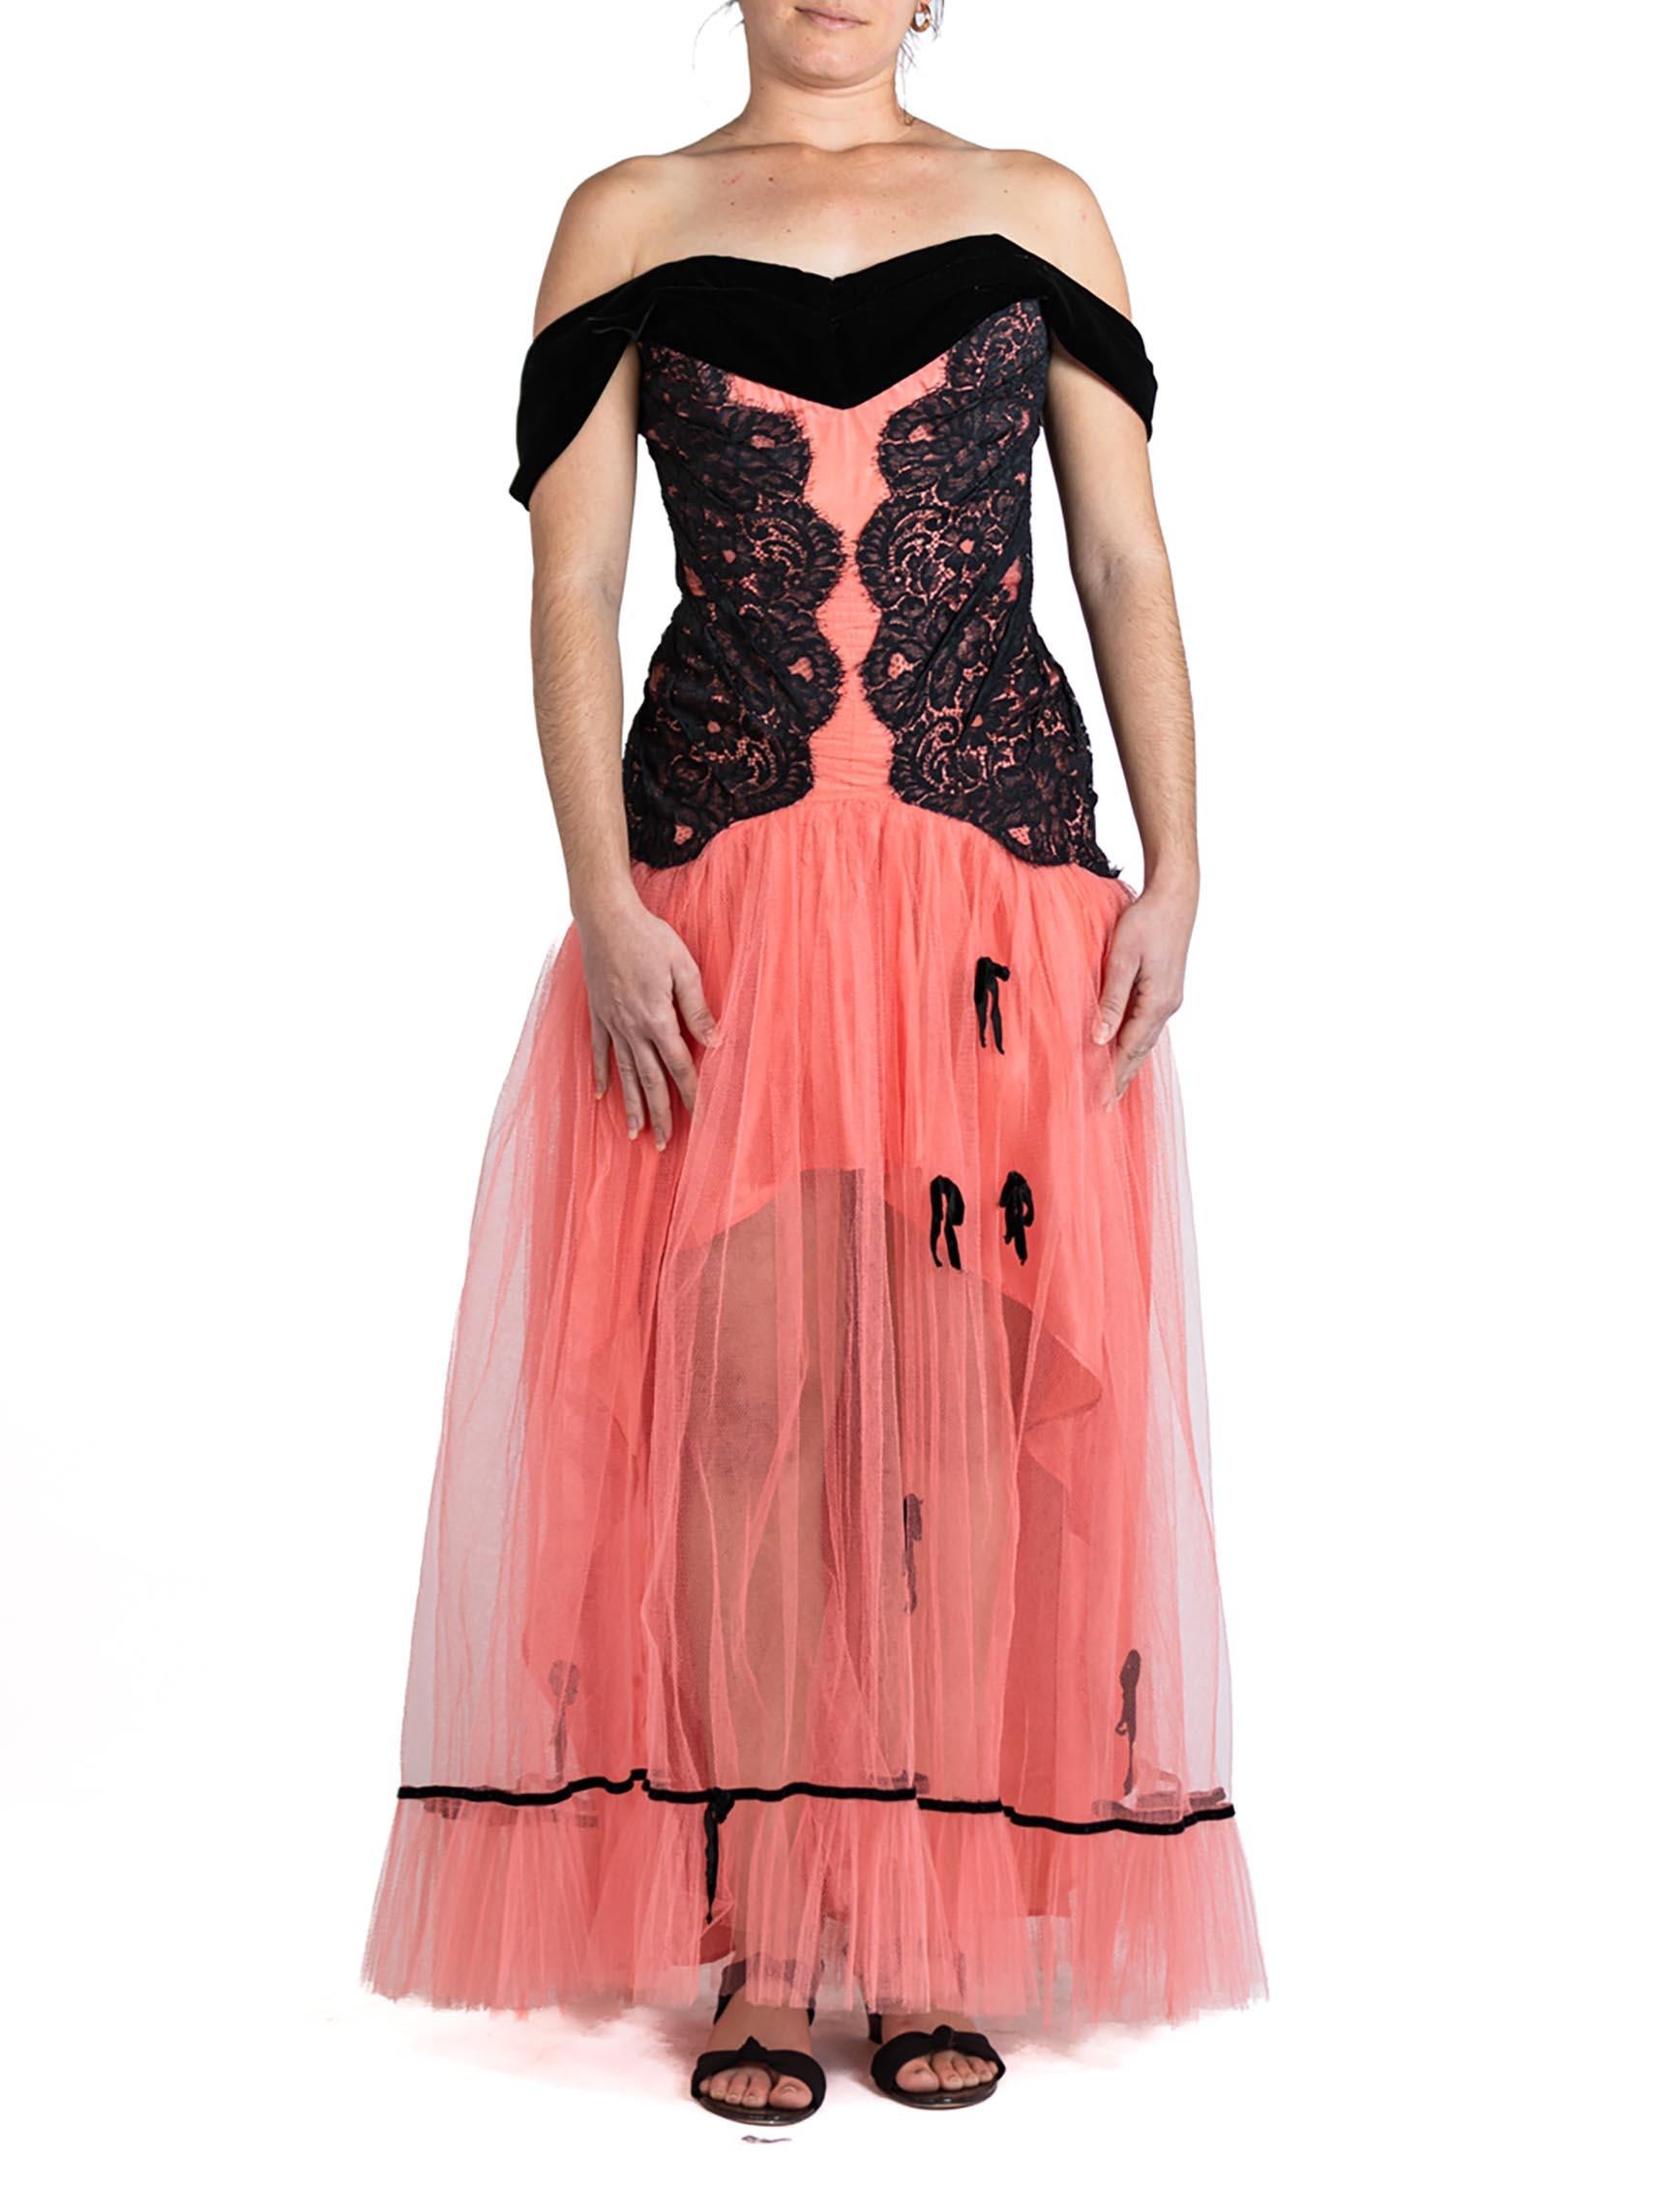 Women's MORPHEW ATELIER Salmon Pink & Black Rayon Blend Tulle Lace Gown With Velvet Bow For Sale